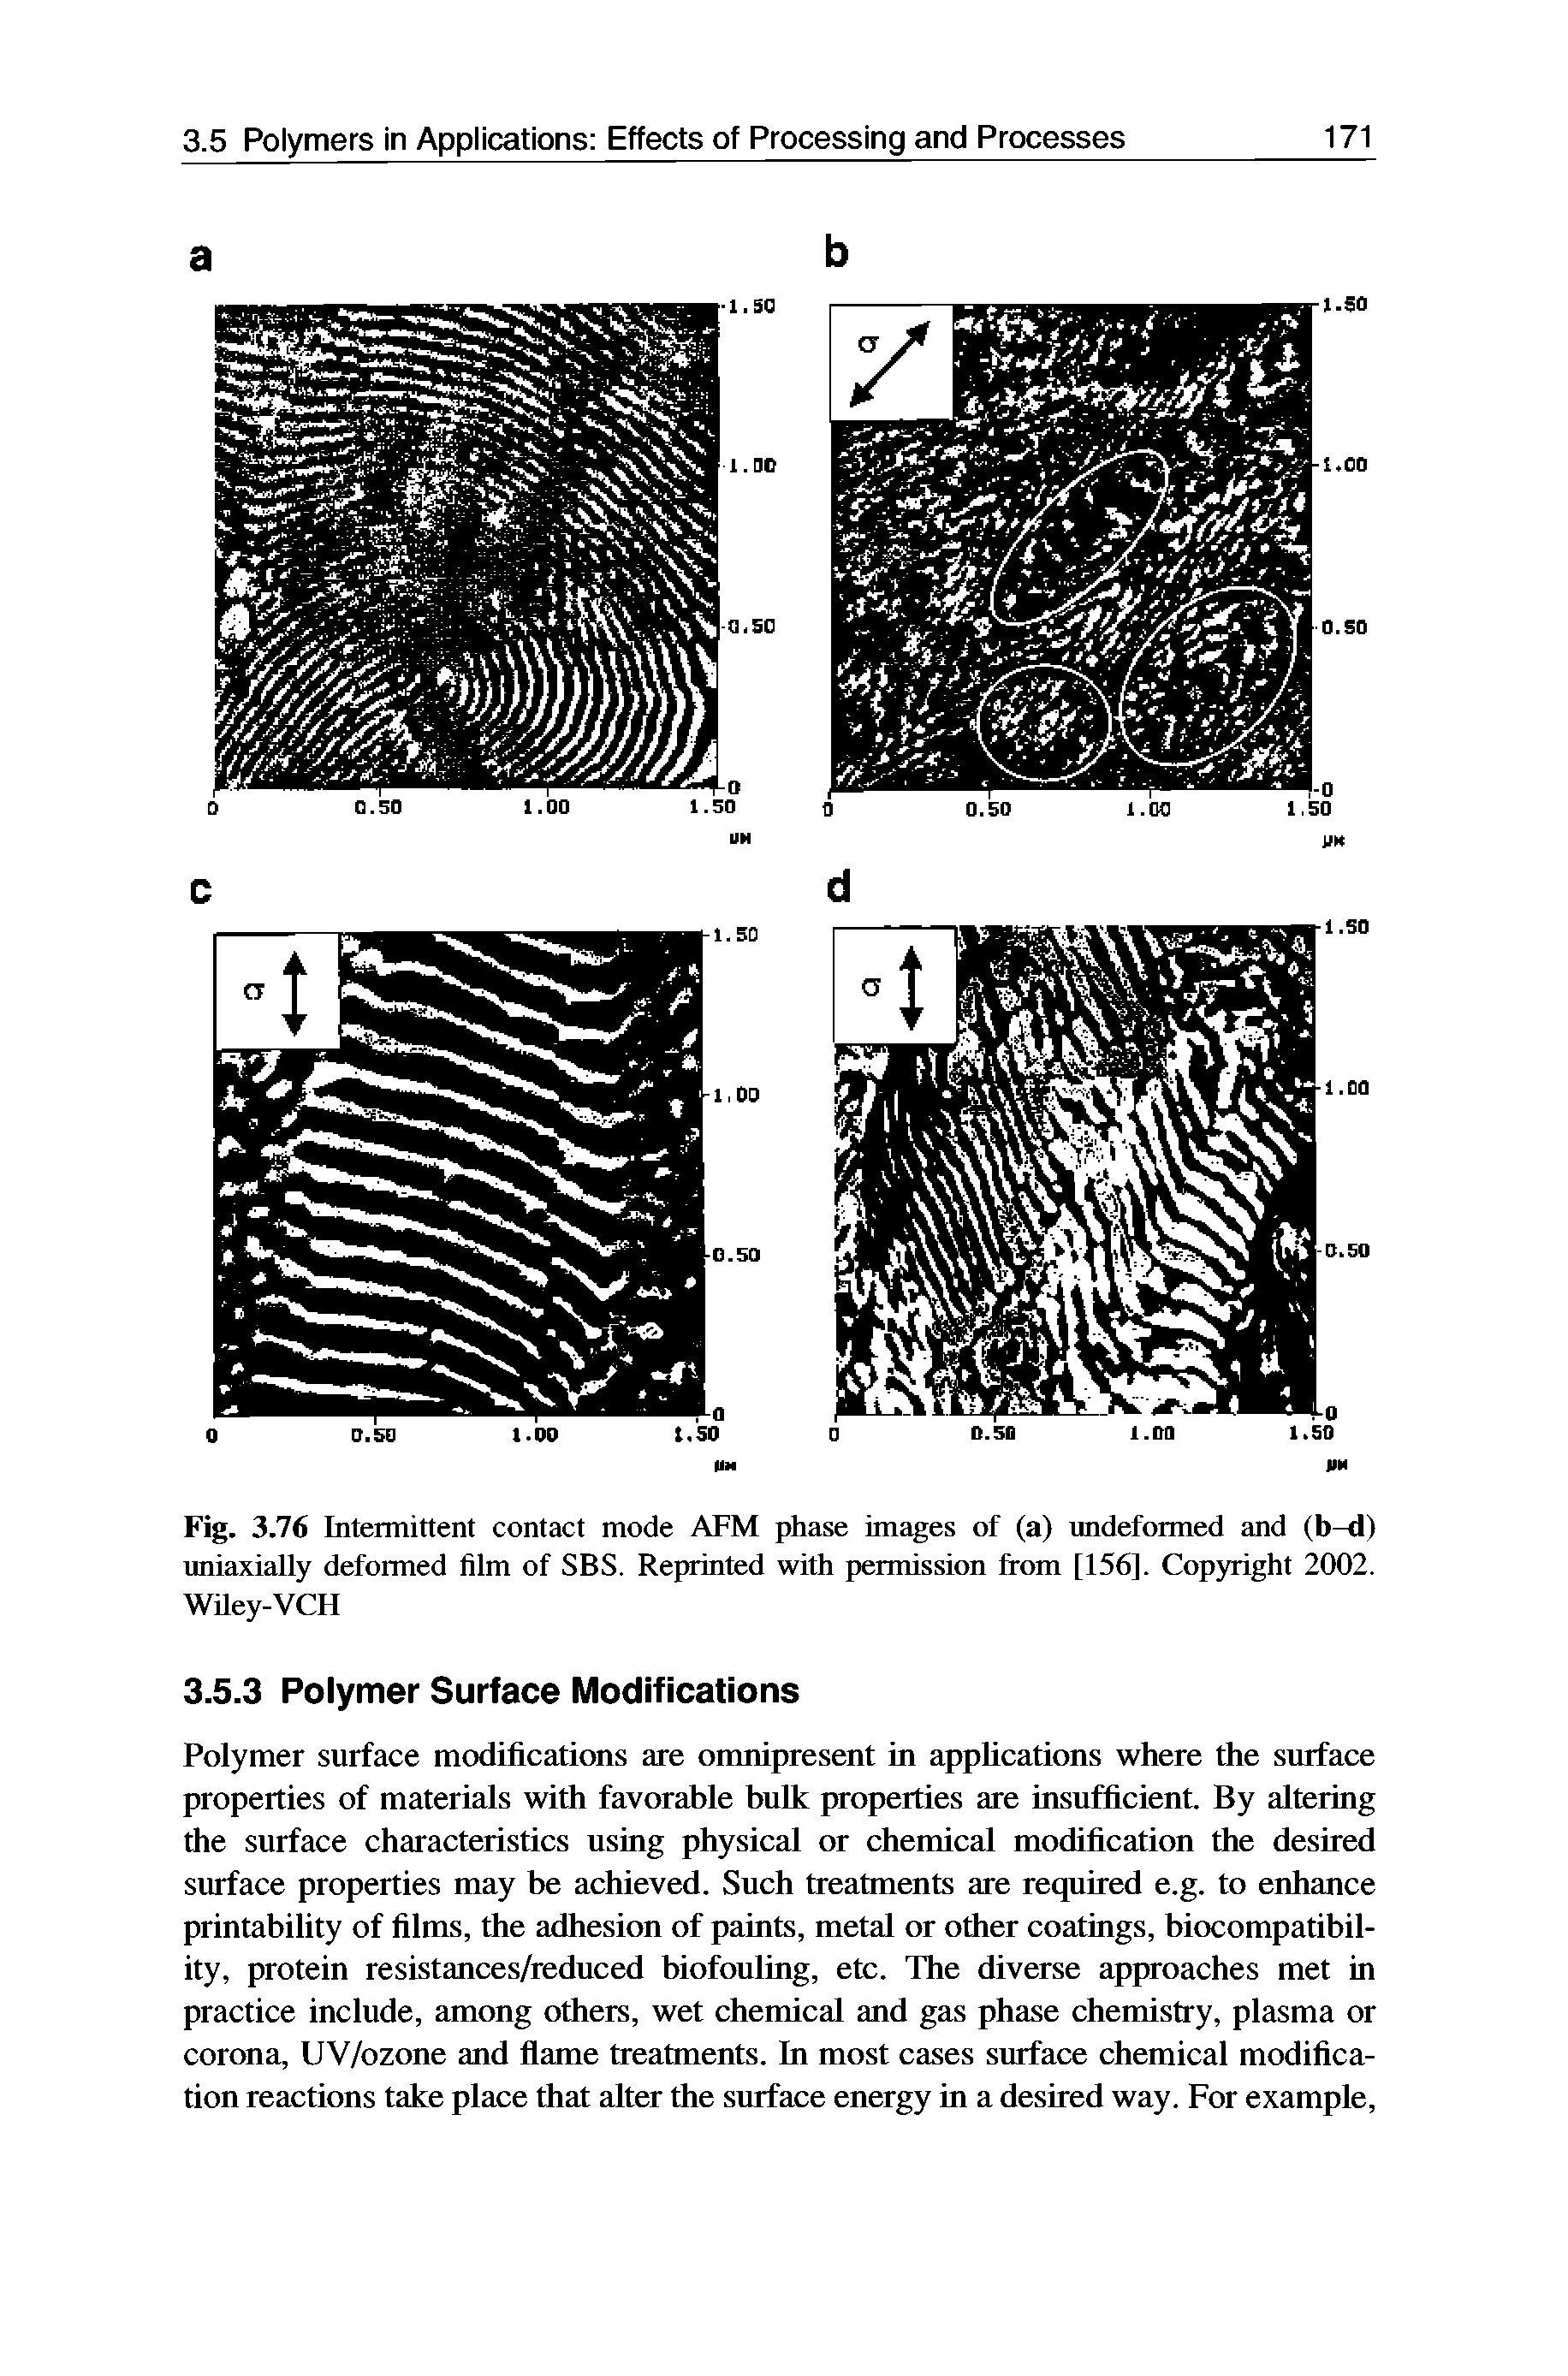 Fig. 3.76 Intermittent contact mode AFM phase images of (a) undeformed and (b-d) uniaxially deformed film of SBS. Reprinted with permission from [156]. Copyright 2002. Wiley-VCH...